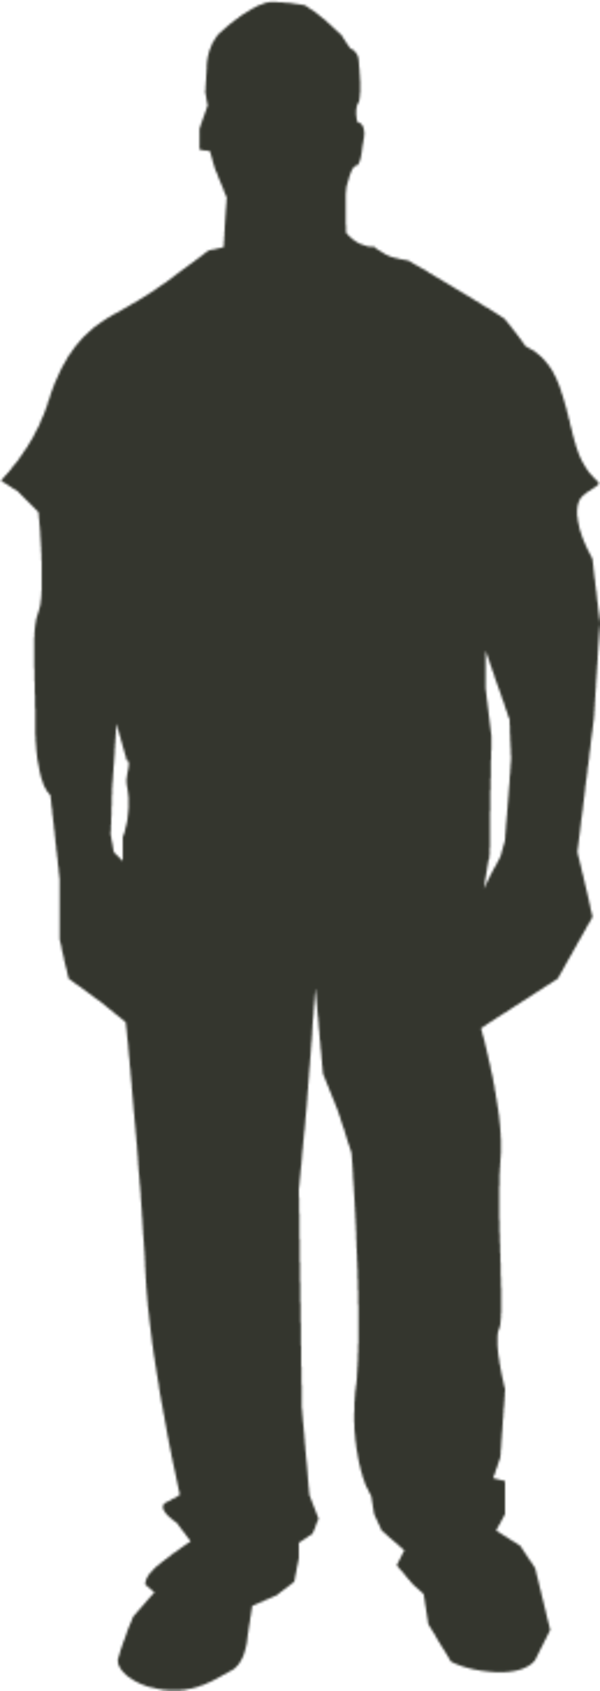 Person Outline Clip art - Man Standing Silhouette png download - 600*